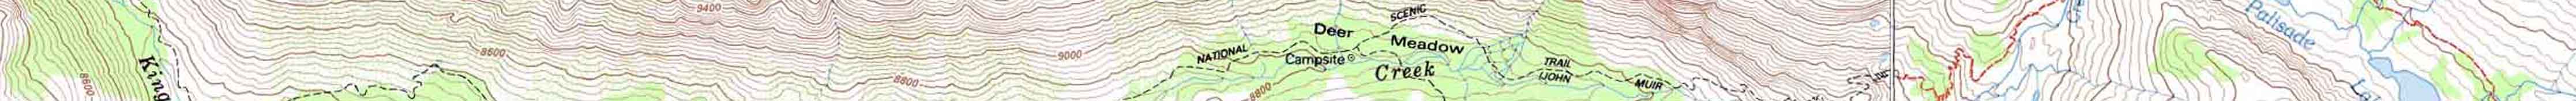 Backpacking map of Bishop Pass to Pinchot Pass on the John Muir Trail.